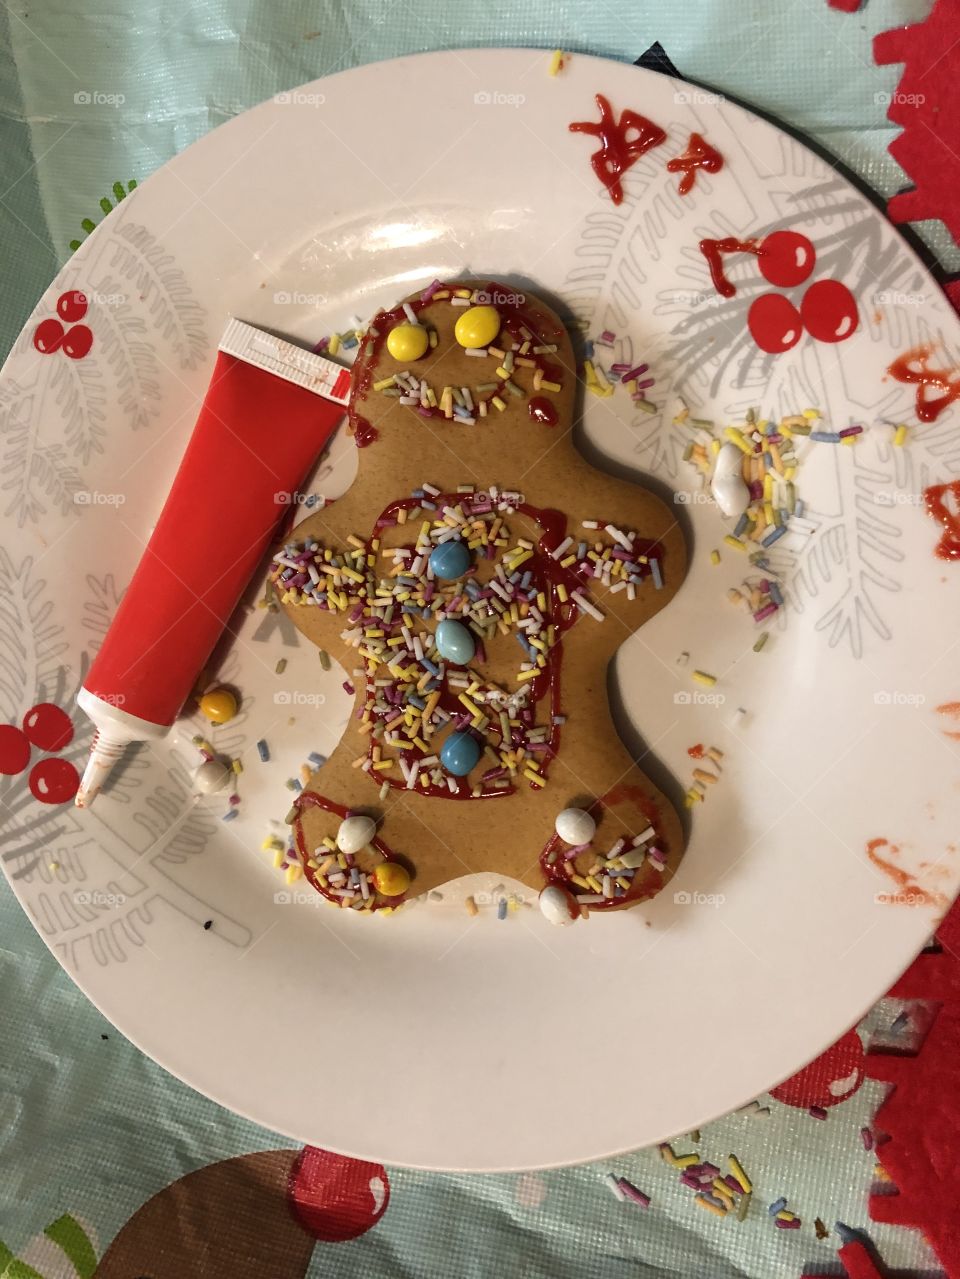 Kids activities decorate a ginger bread man 